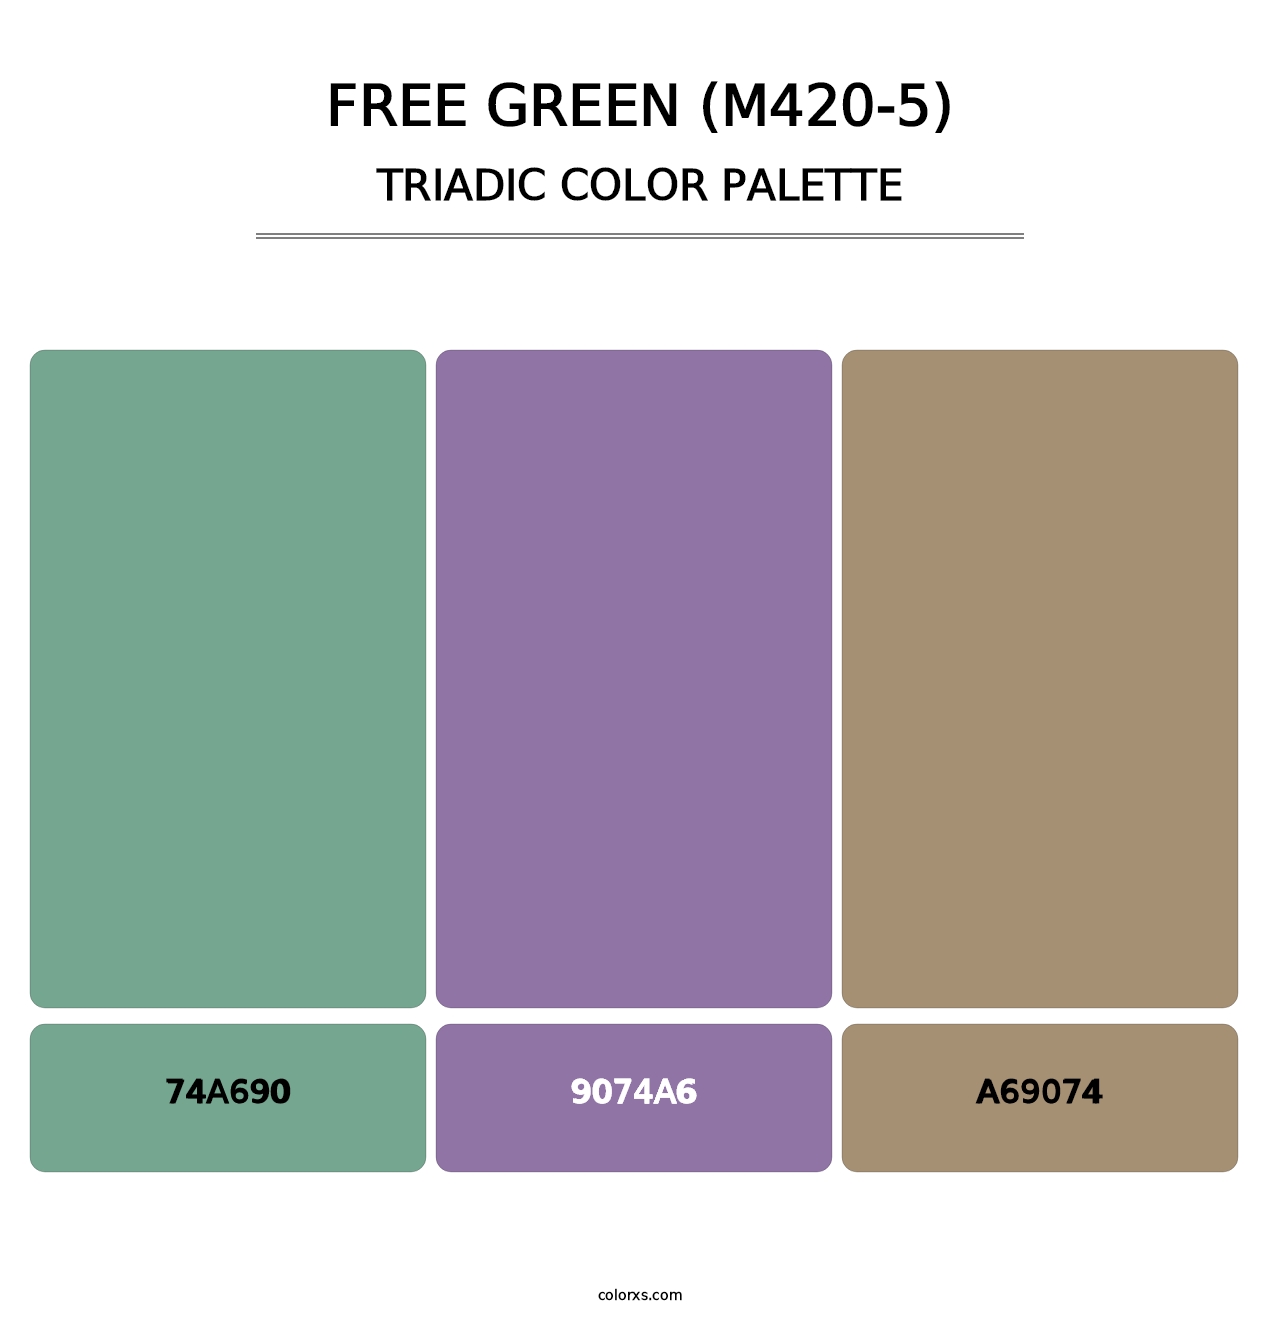 Free Green (M420-5) - Triadic Color Palette